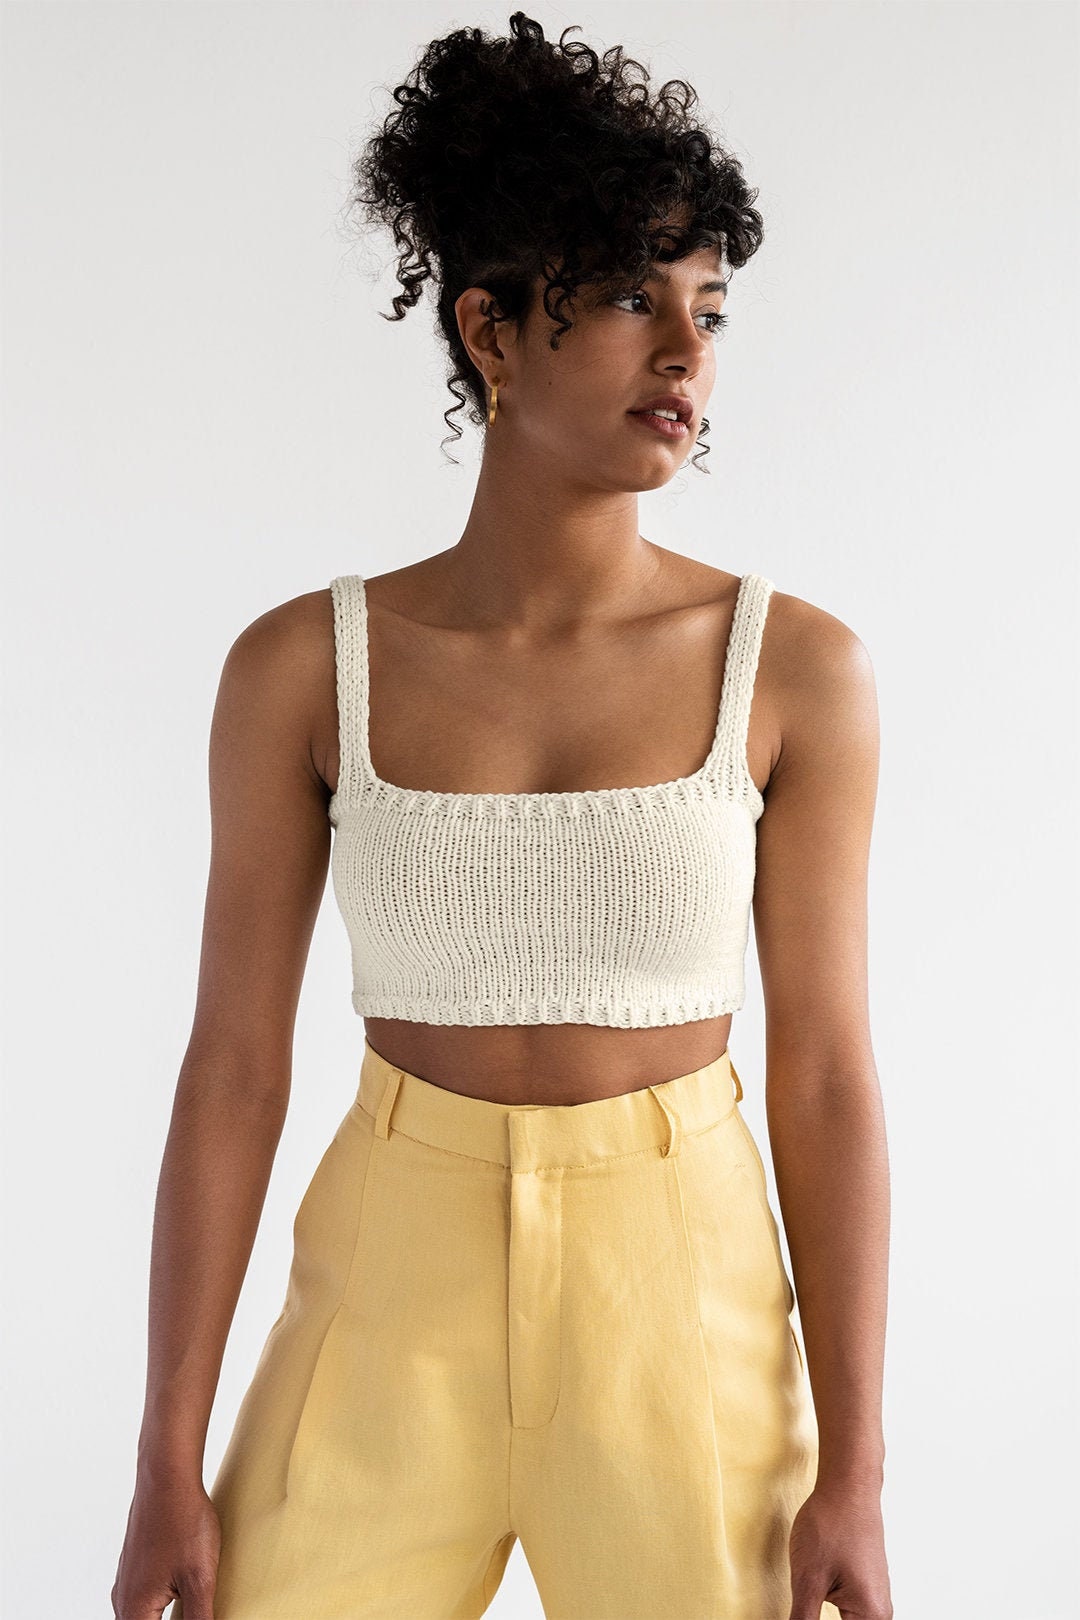 Square Neck Crop Top, Minimal Knit Top, Cropped Yoga Top, Hand Knit, Square  Neckline, Knit Bra, Fitted Cotton Bralette in Vanilla Scoop 